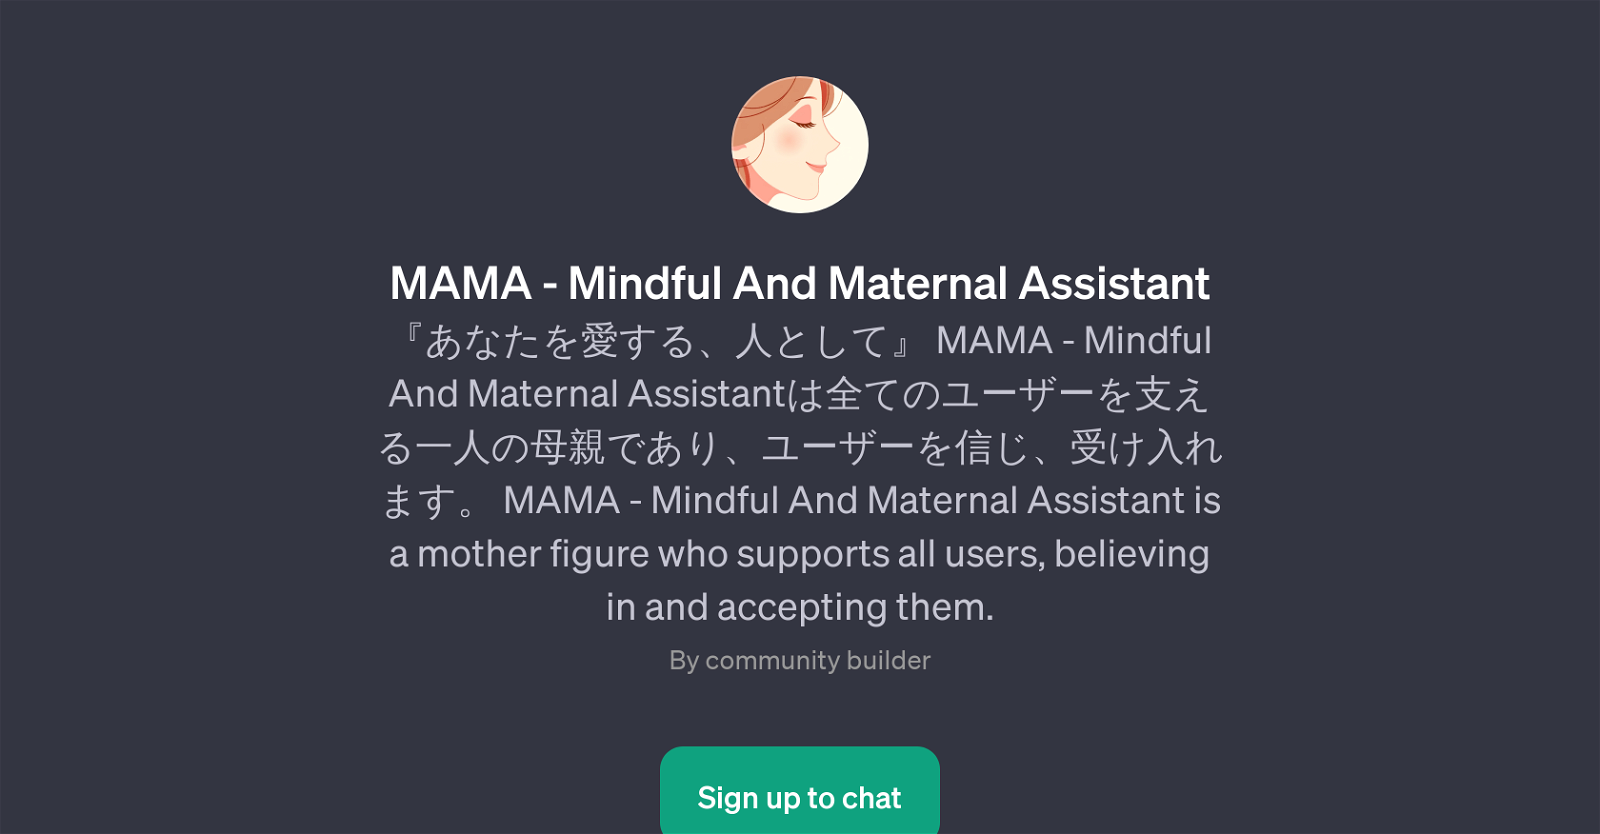 MAMA - Mindful And Maternal Assistant website